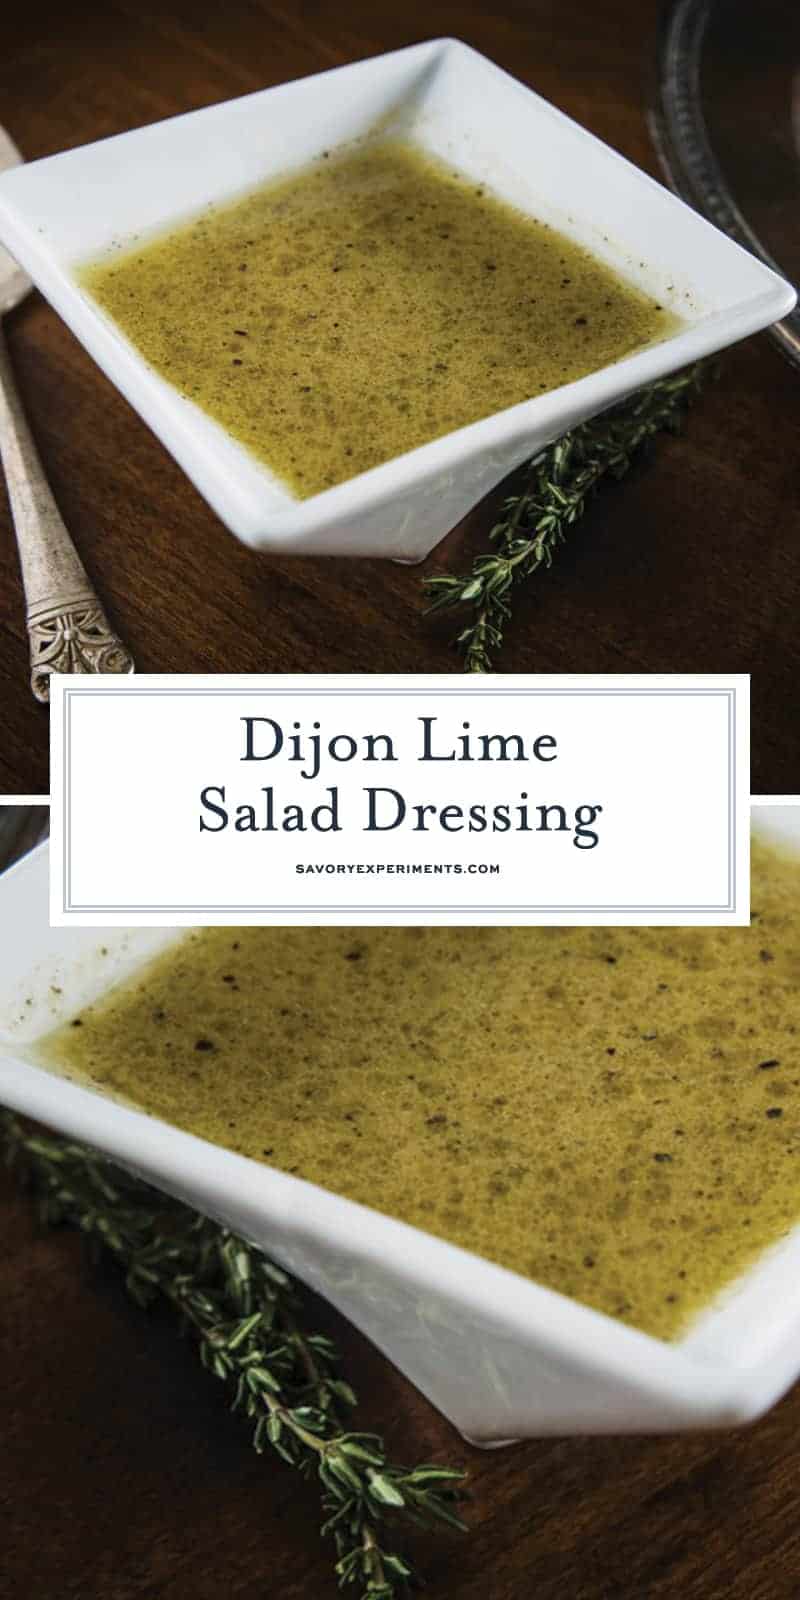 Dijon Lime Salad Dressing is an easy homemade salad dressing with citrus flavors and tangy Dijon mustard. Use on your favorite salad, as a marinade or on grilled or roasted vegetables. #homemadesaladdressing www.savoryexperiments.com 